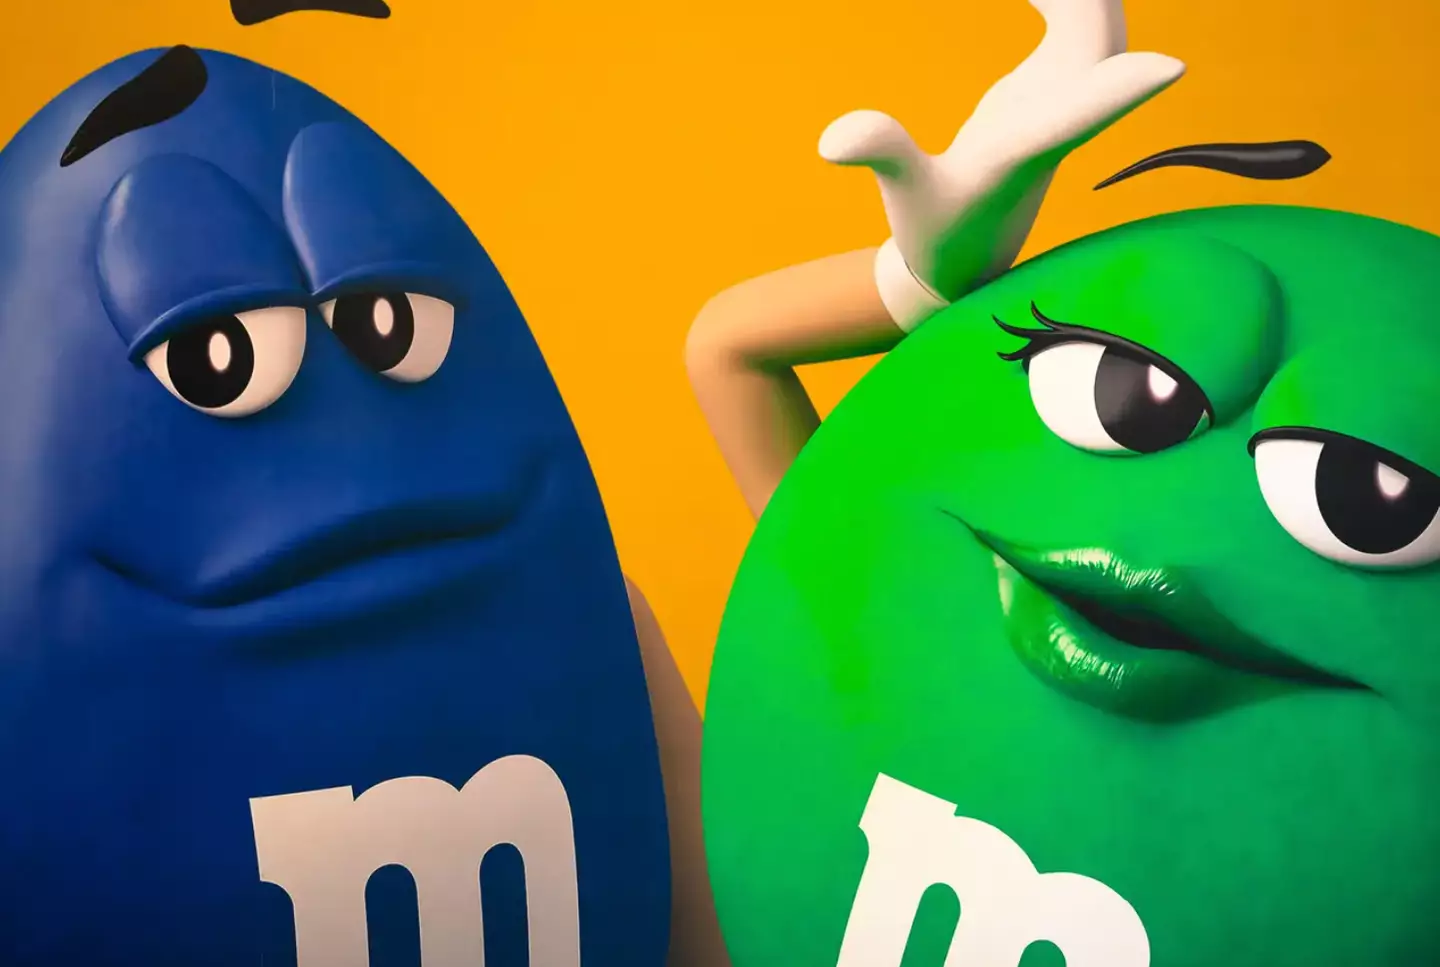 The infamous M&M characters have had a makeover.